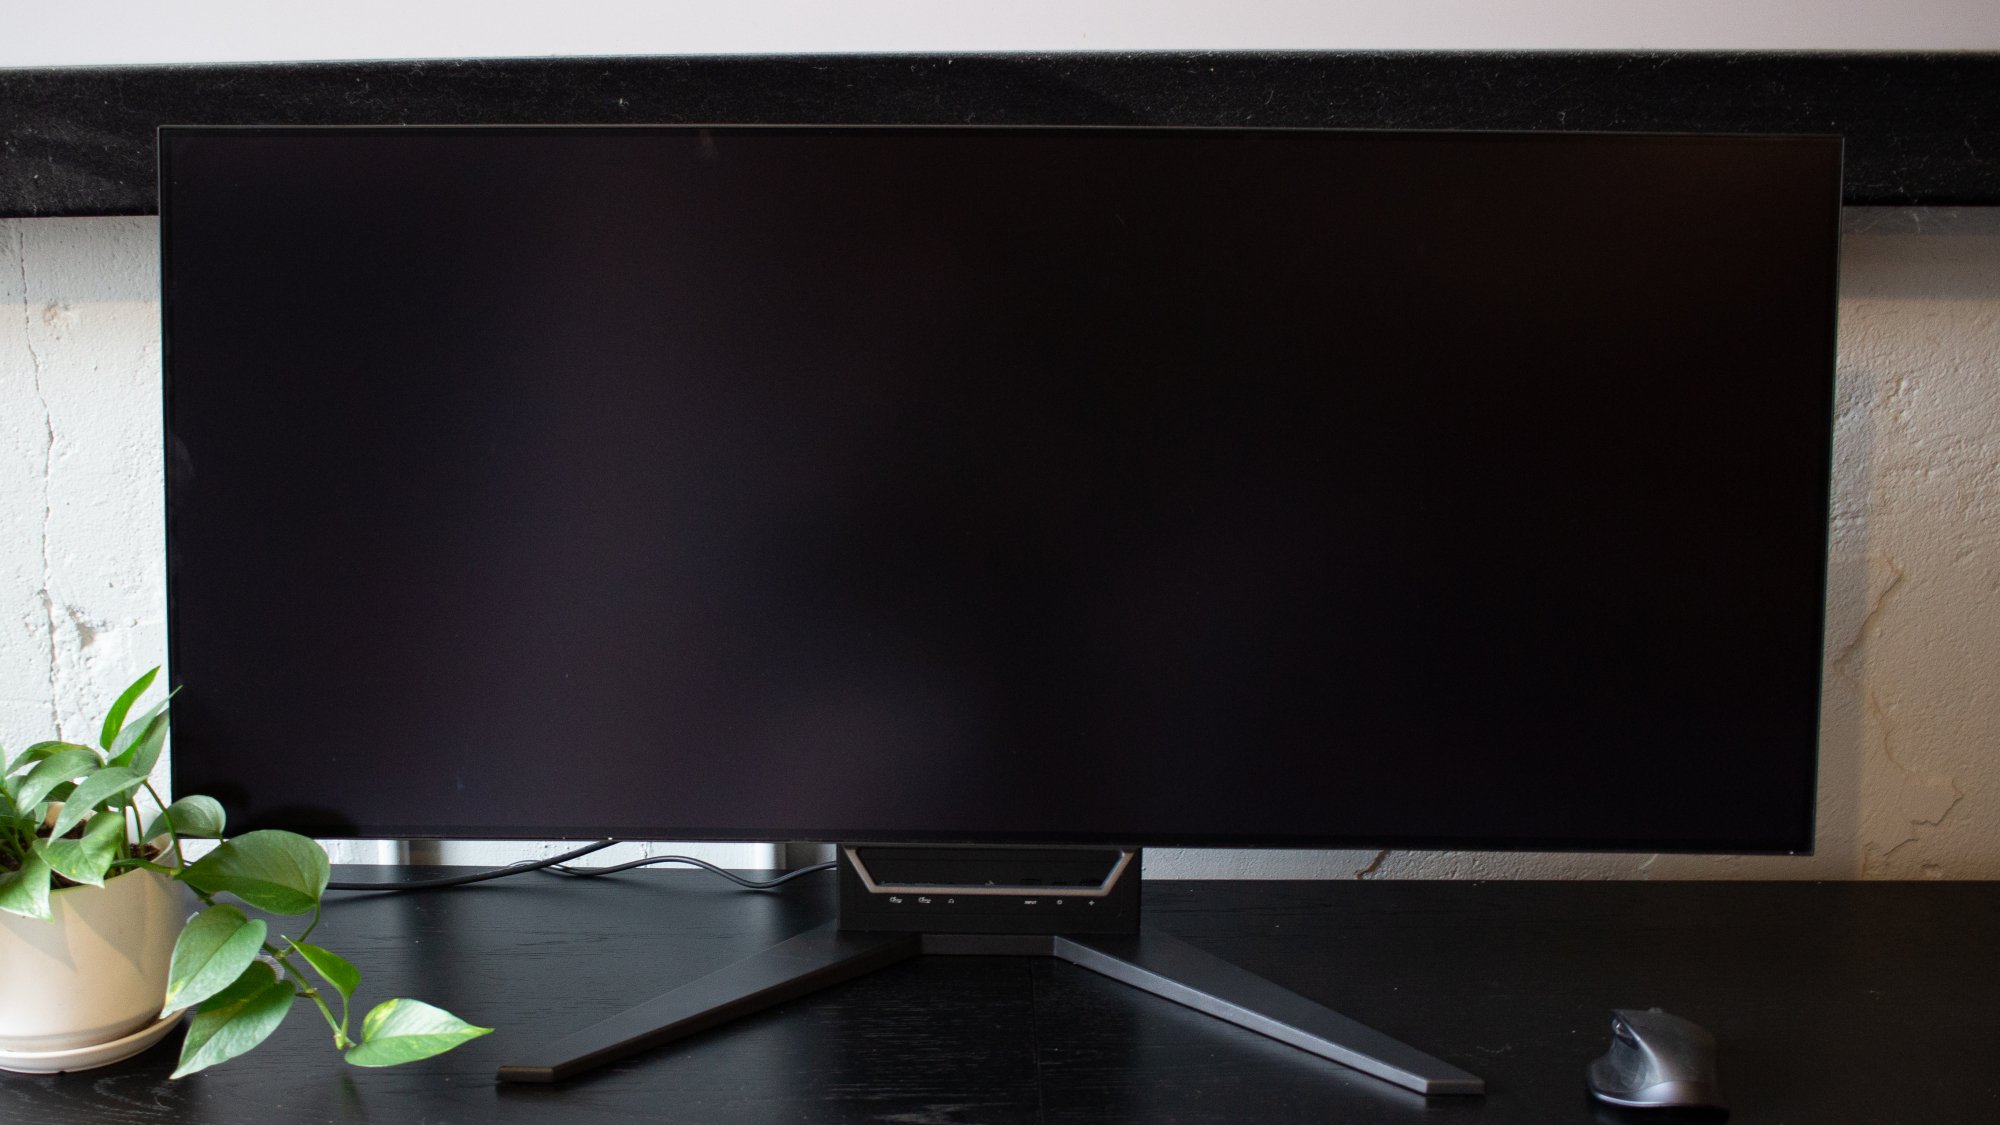 wide monitor in flat position with screen turned off